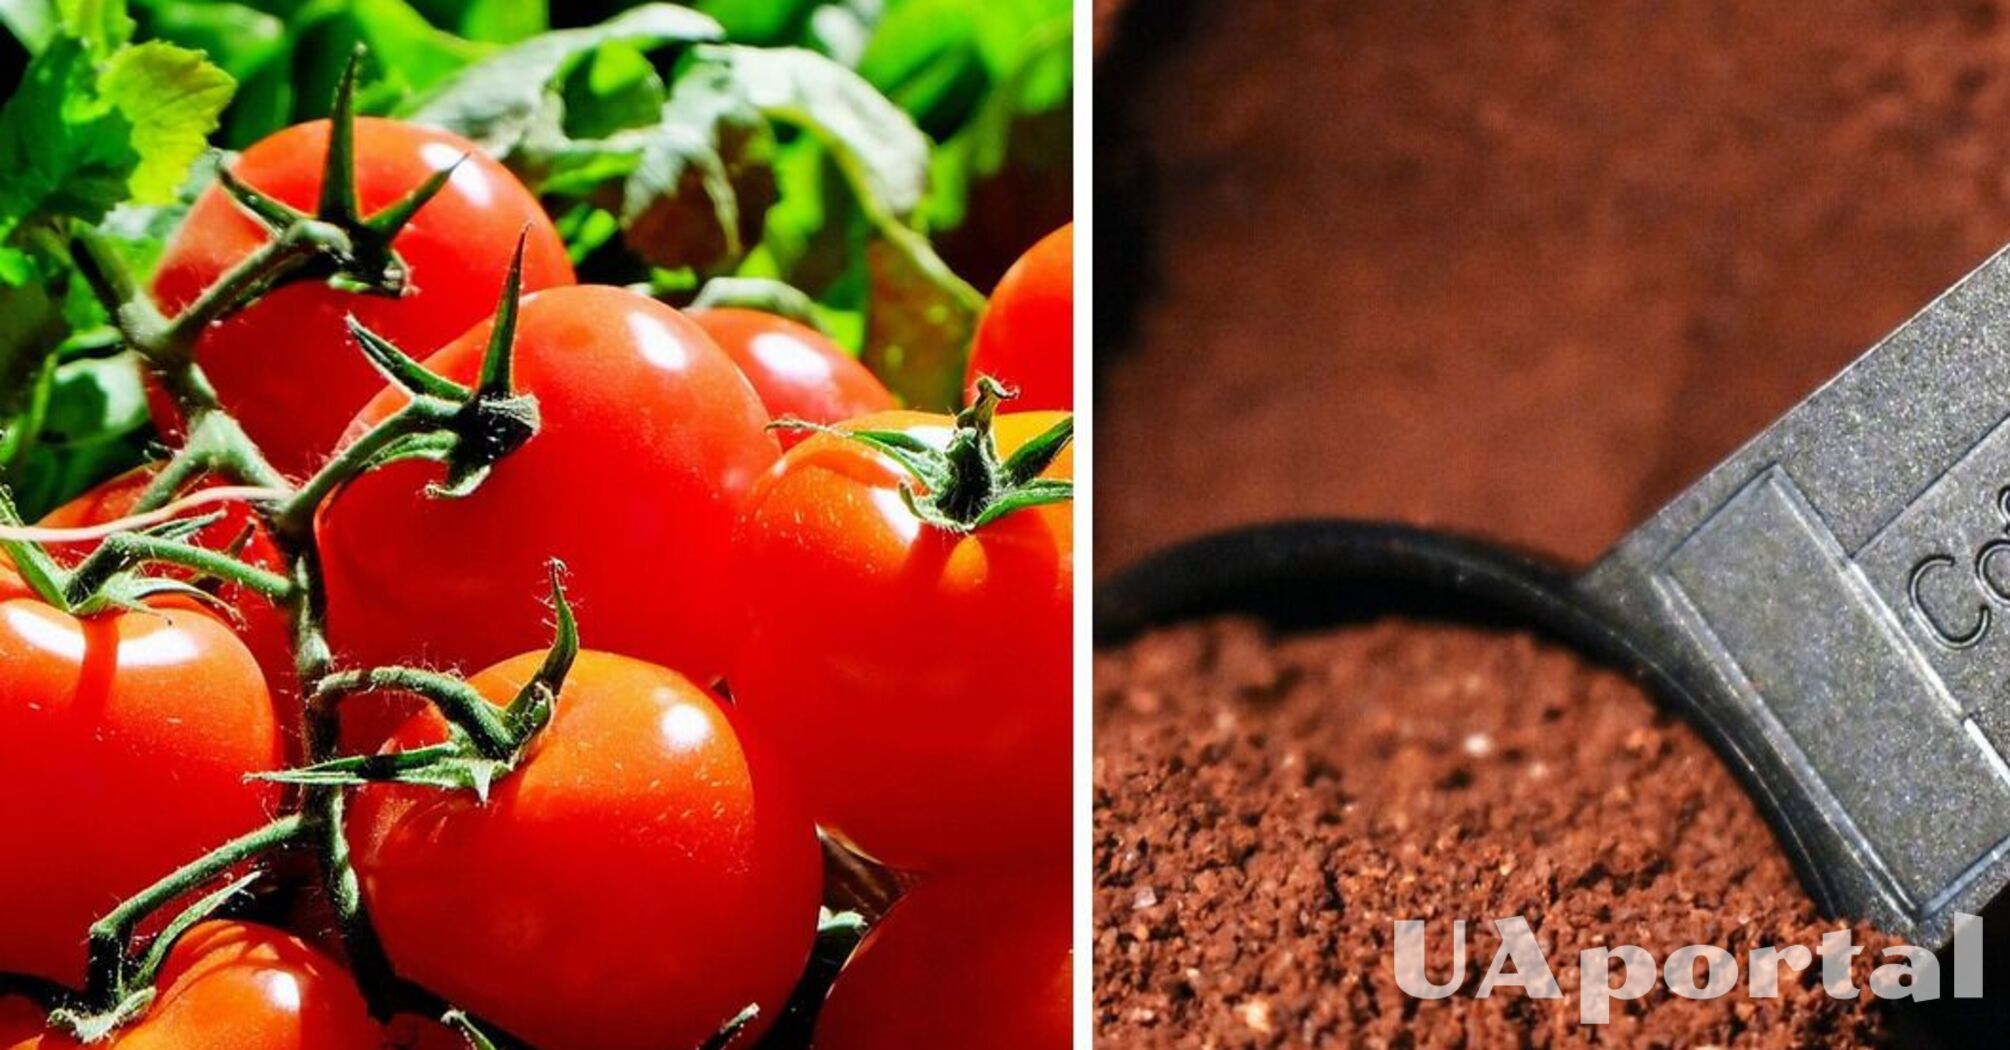 Add coffee grounds to the soil to get an unprecedented harvest of tomatoes: the secrets of summer residents